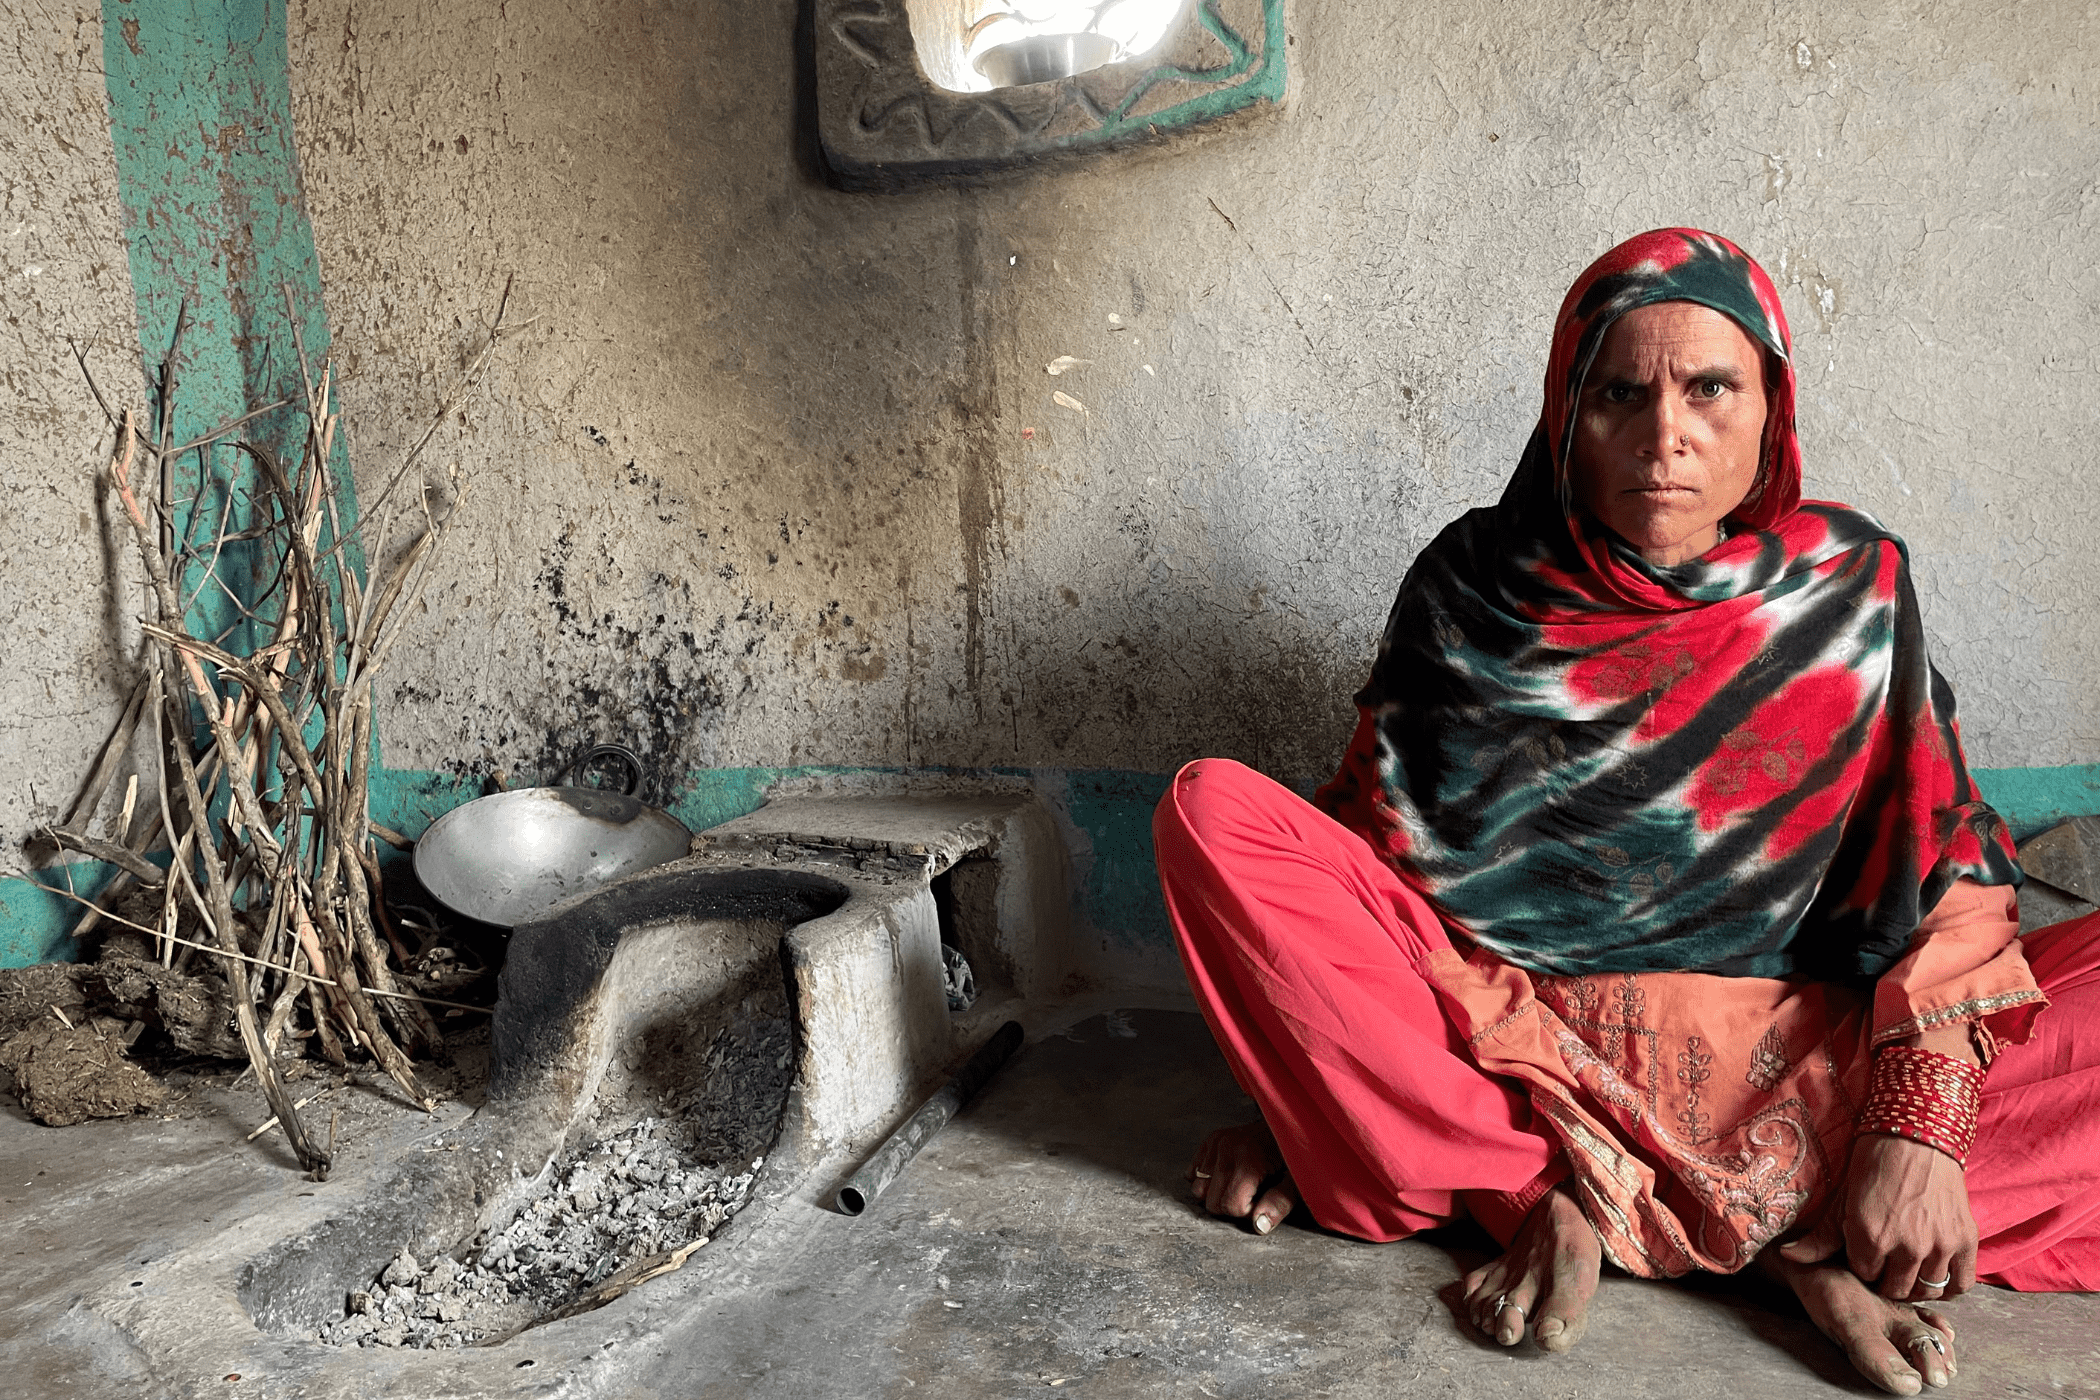 A woman in a red salwar kameez, sits beside an earthen stove and firewood.